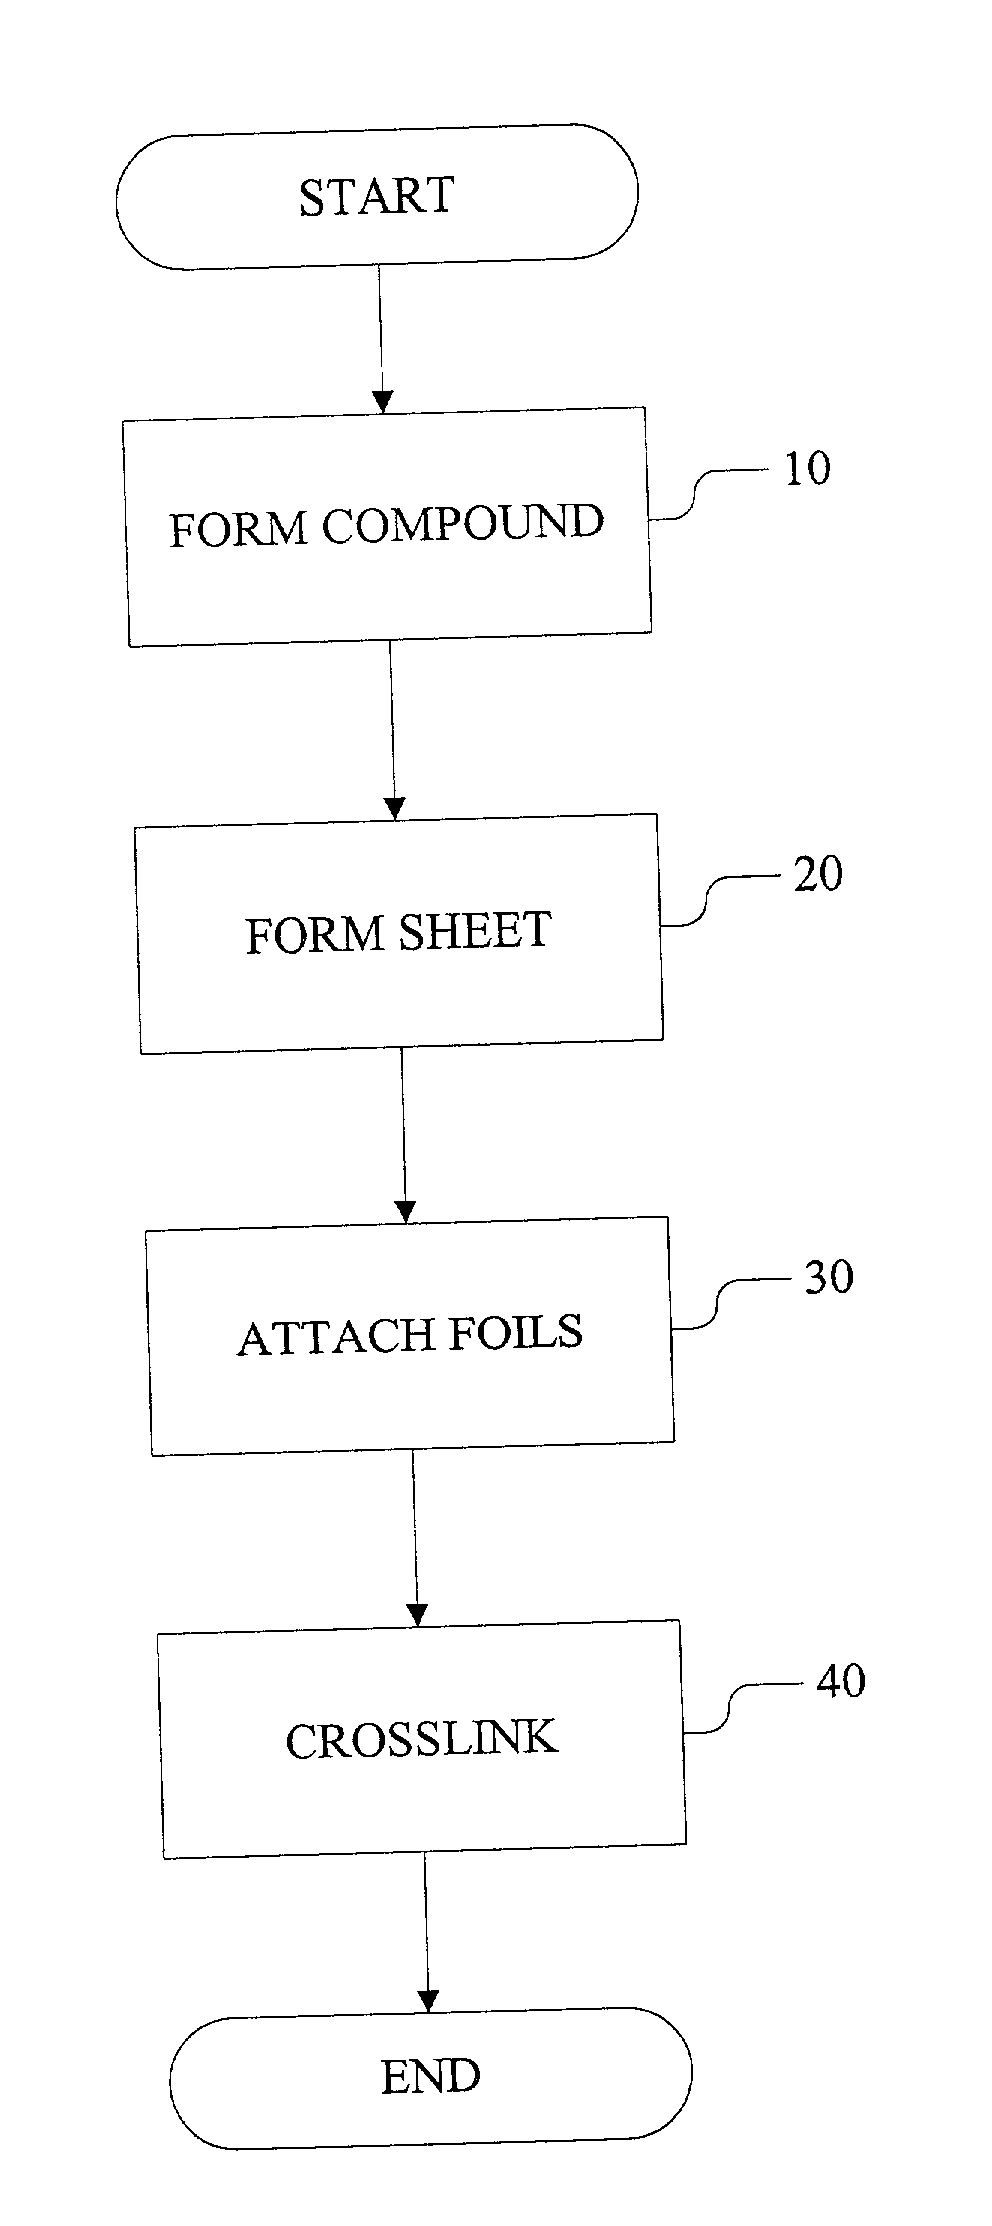 Low switching temperature polymer positive temperature coefficient device